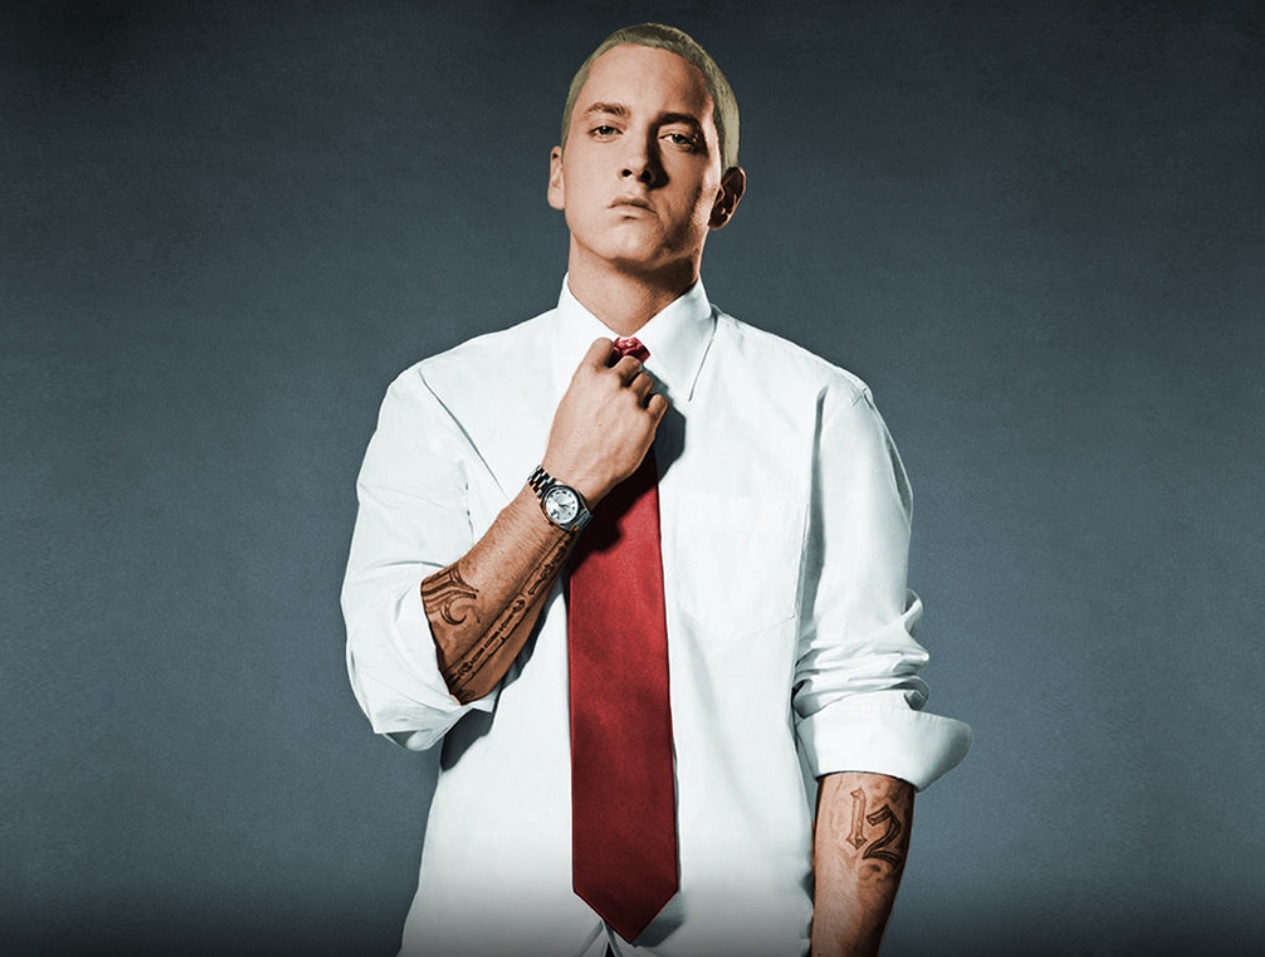 Eminem Age 2022, Birthday, Family, Wife, Daughter